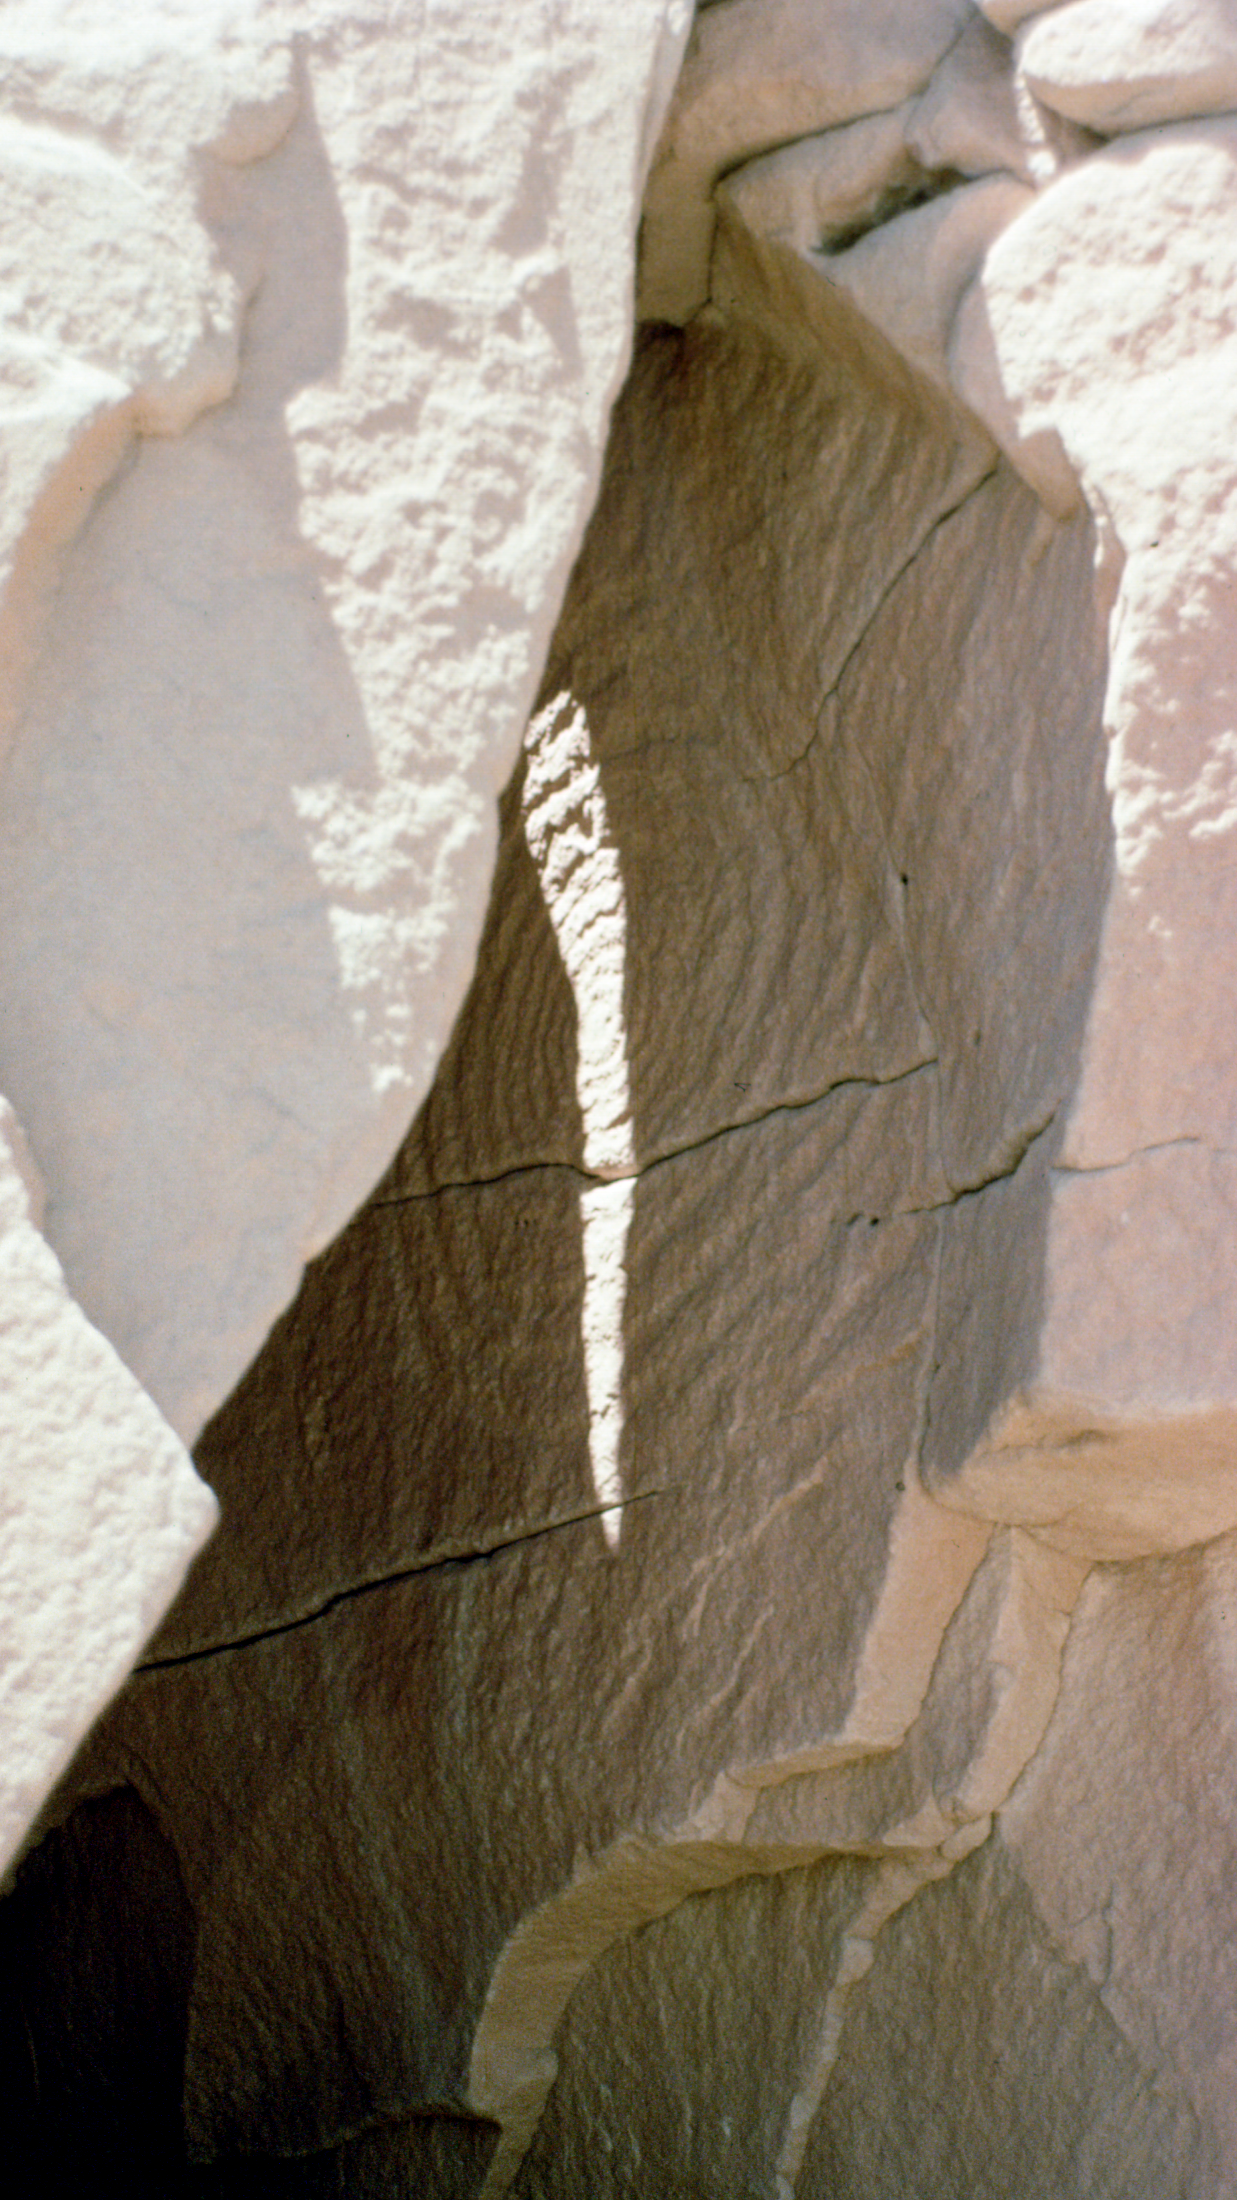 A rock formation with a large, cleaved, cave-like opening that is mostly in shadow except for a vertical sliver of sunlight lighting up the back wall. 